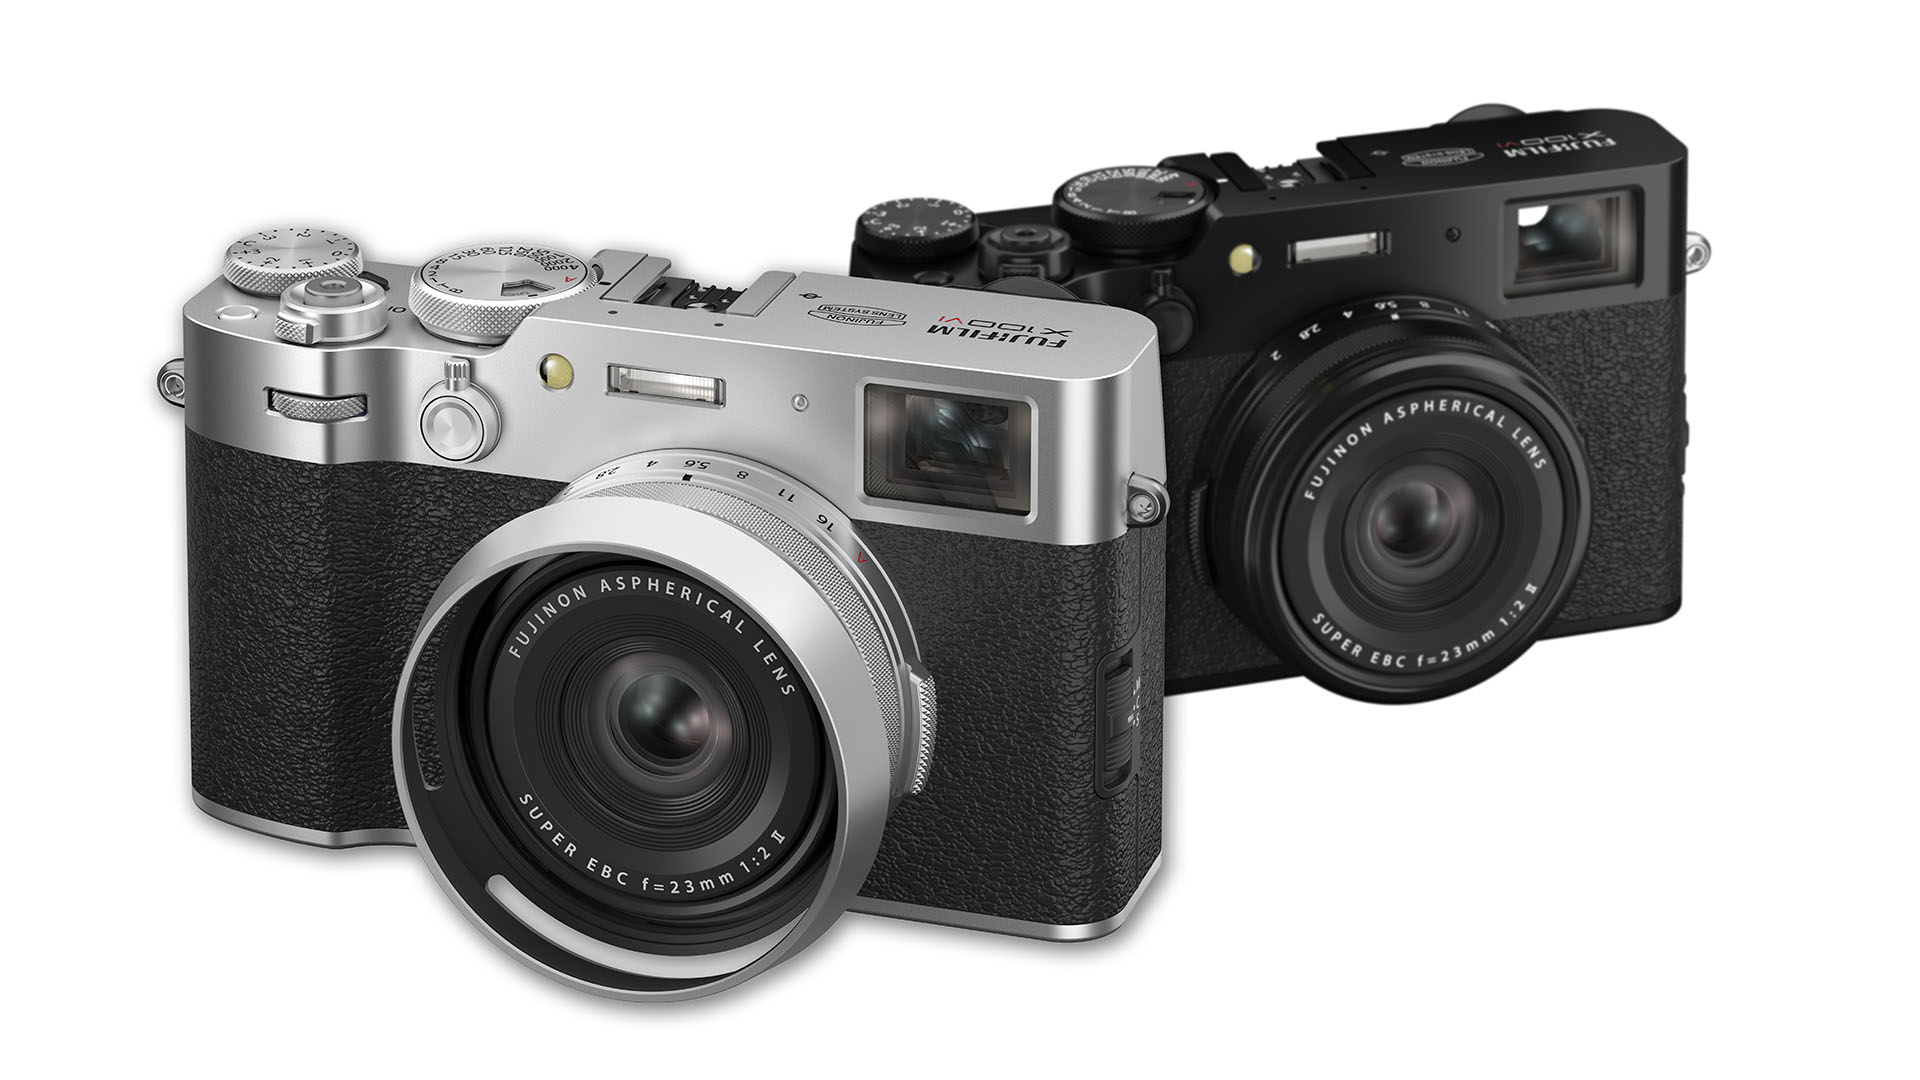 FUJIFILM X100VI Camera Revealed with In-Body Image Stabilization (IBIS) and Internal ND Filter